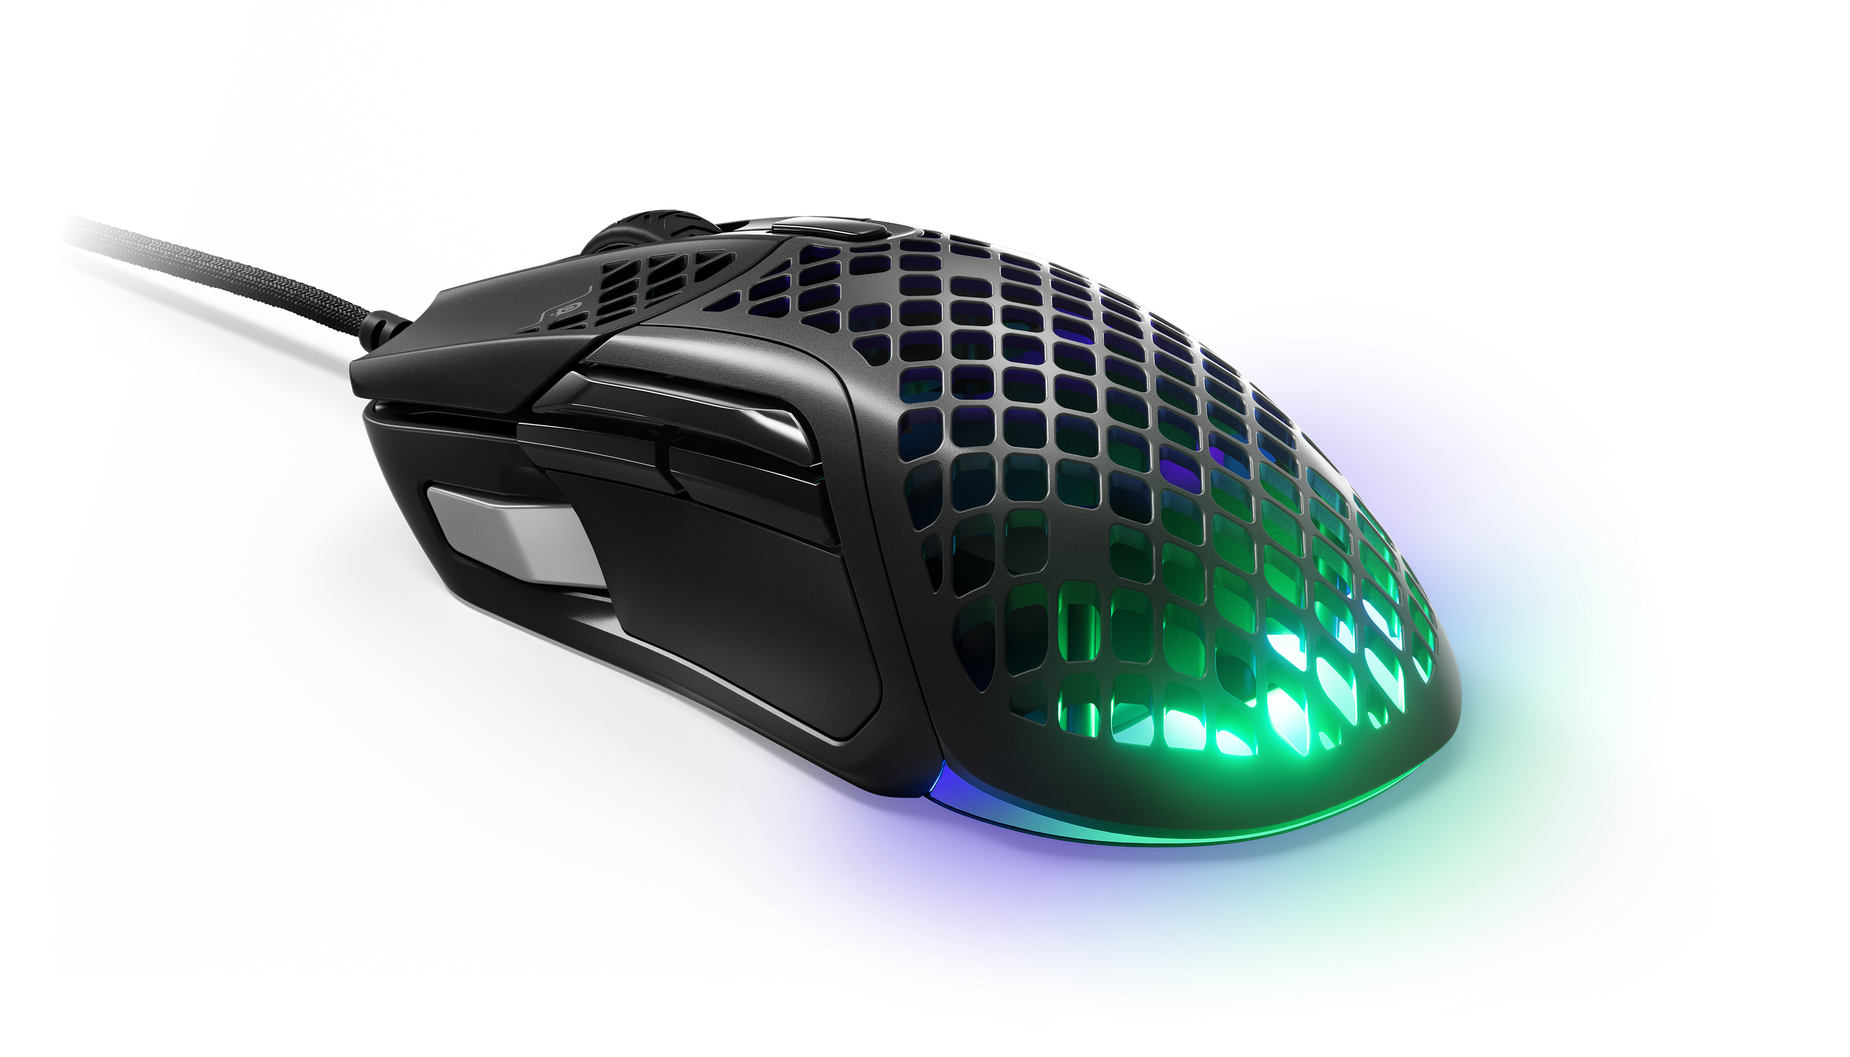 
 An angled view of the Aerox 5 mouse showing off its palm rest.
 